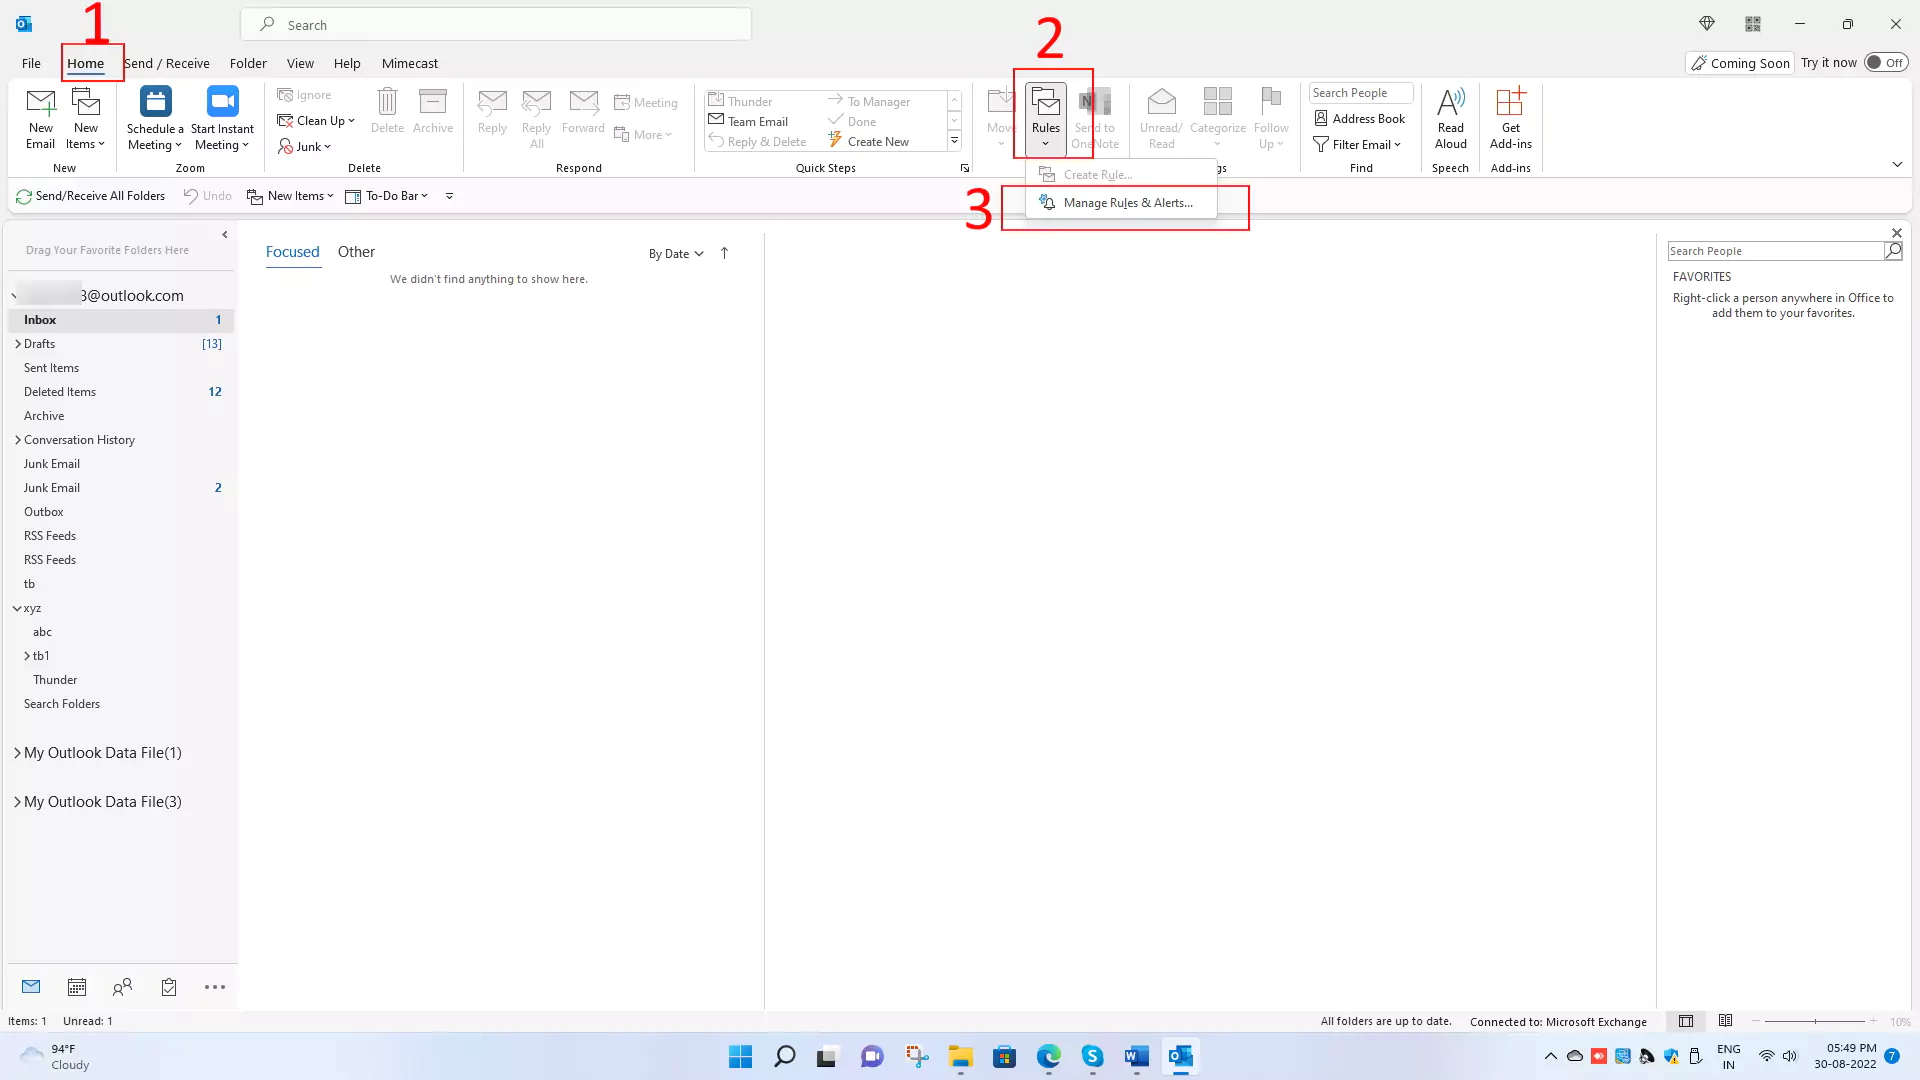 manage-rules-alerts-in-outlook-for-out-of-office-auto-reply